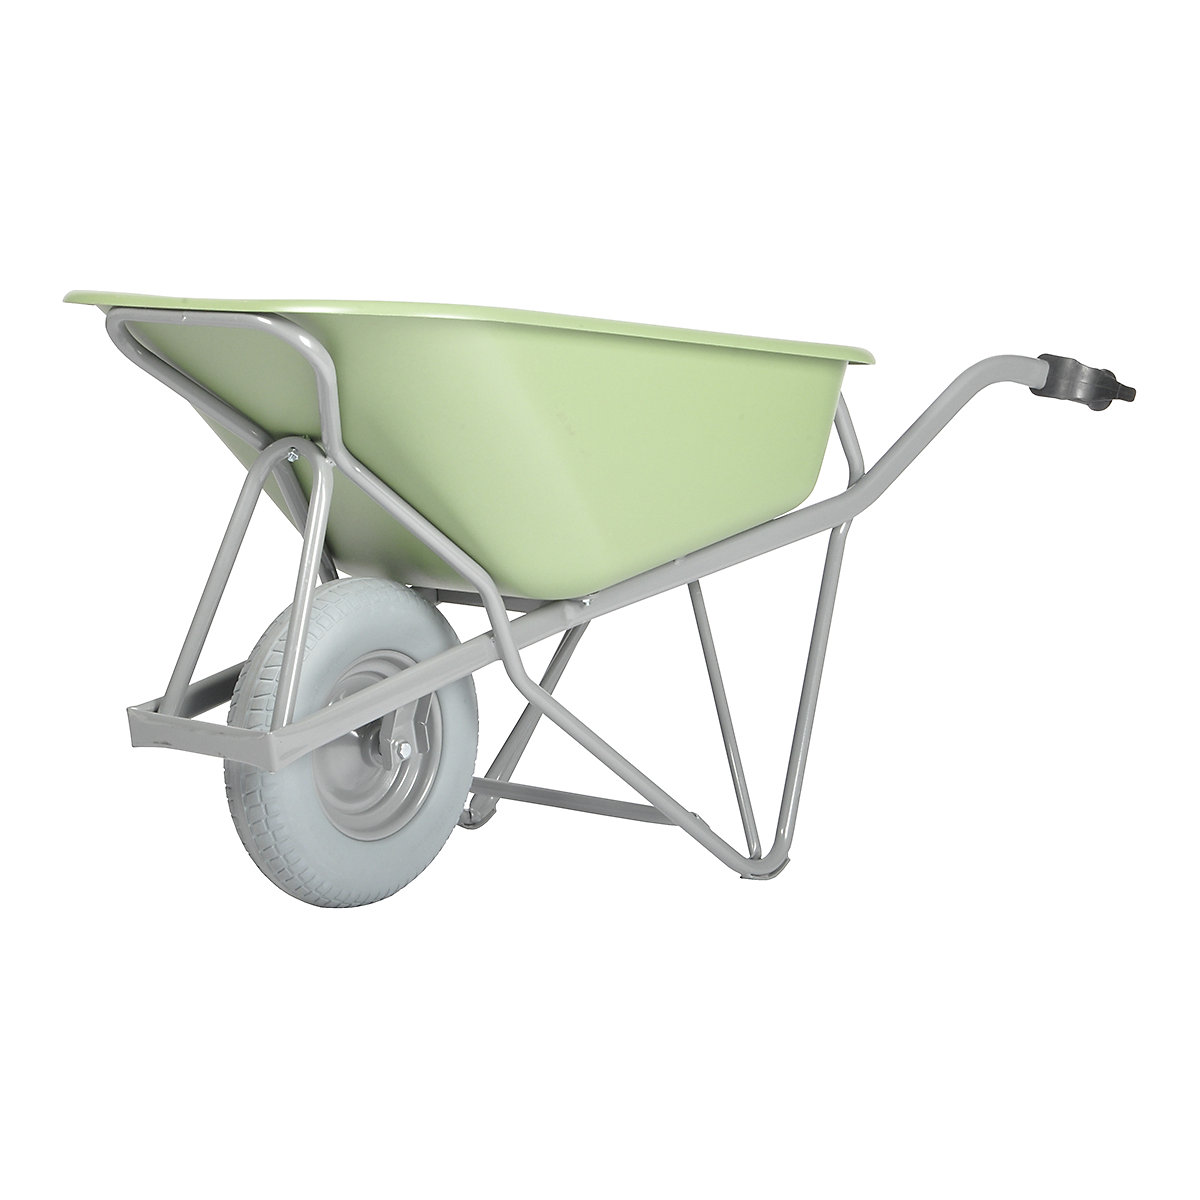 Profi-Max Plus wheel barrow – MATADOR, made of steel, 90 l, HDPE tray, green, puncture proof tyres, 4+ items-2